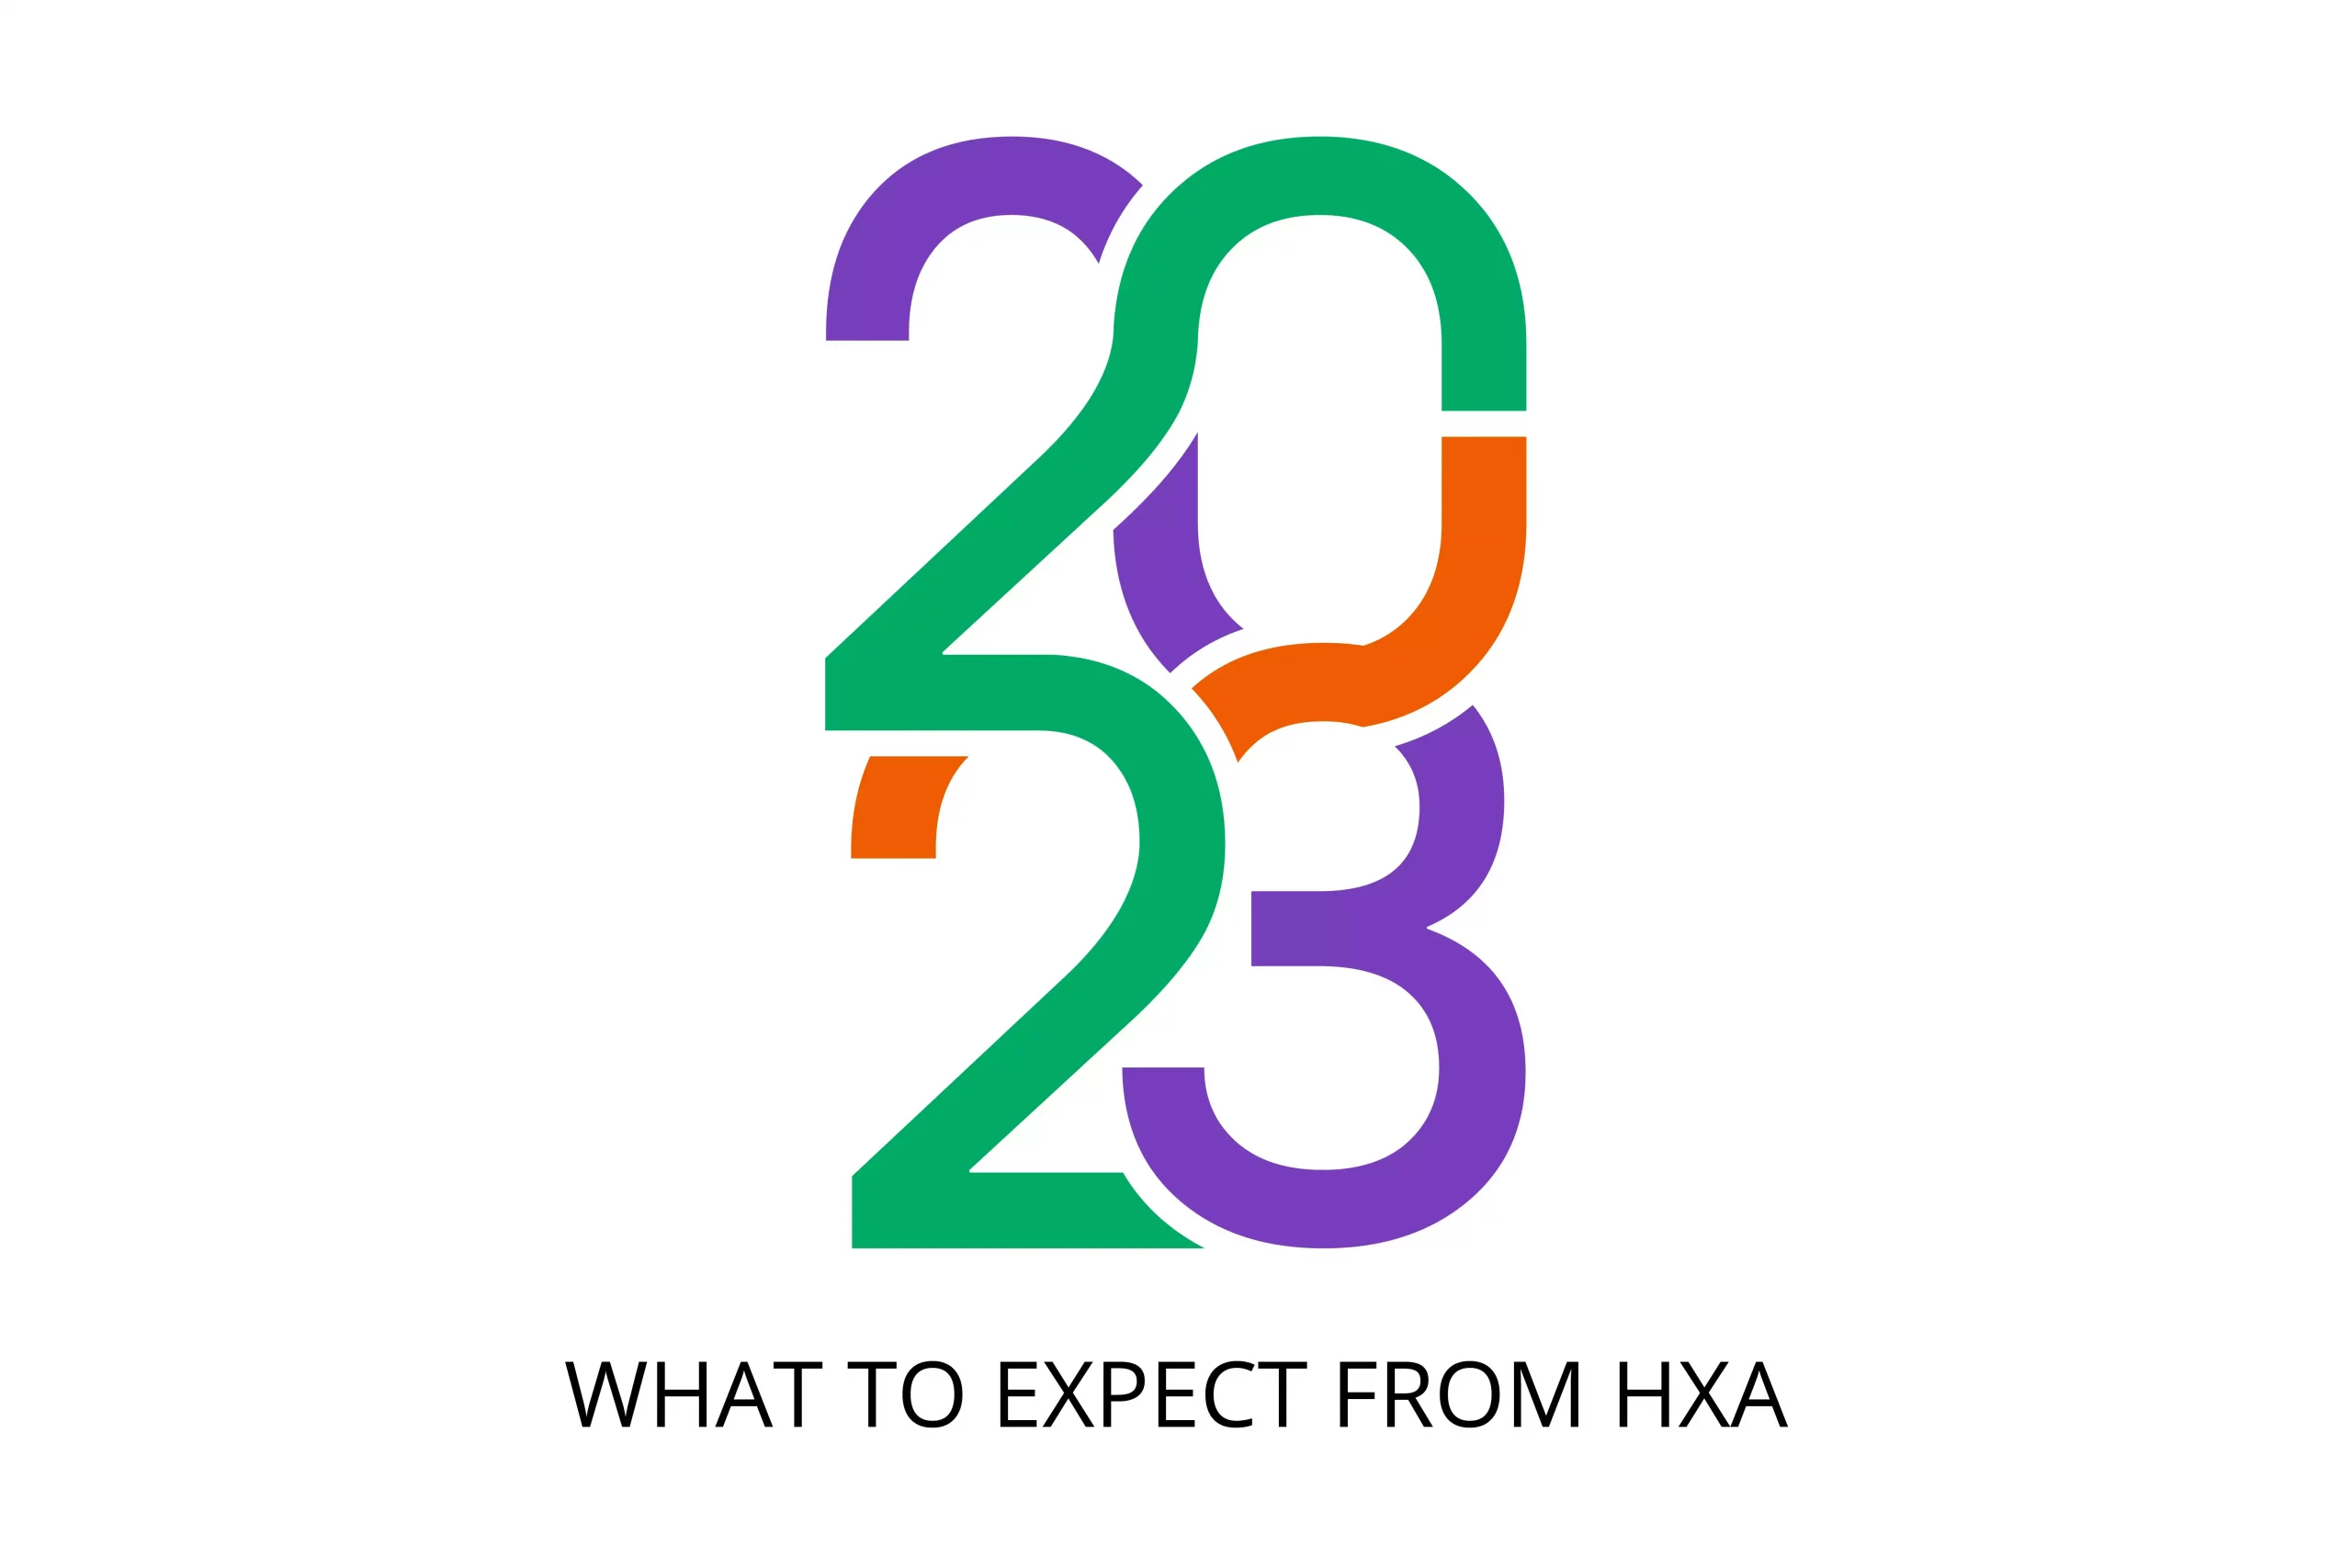 What To Expect from HxA in 2023